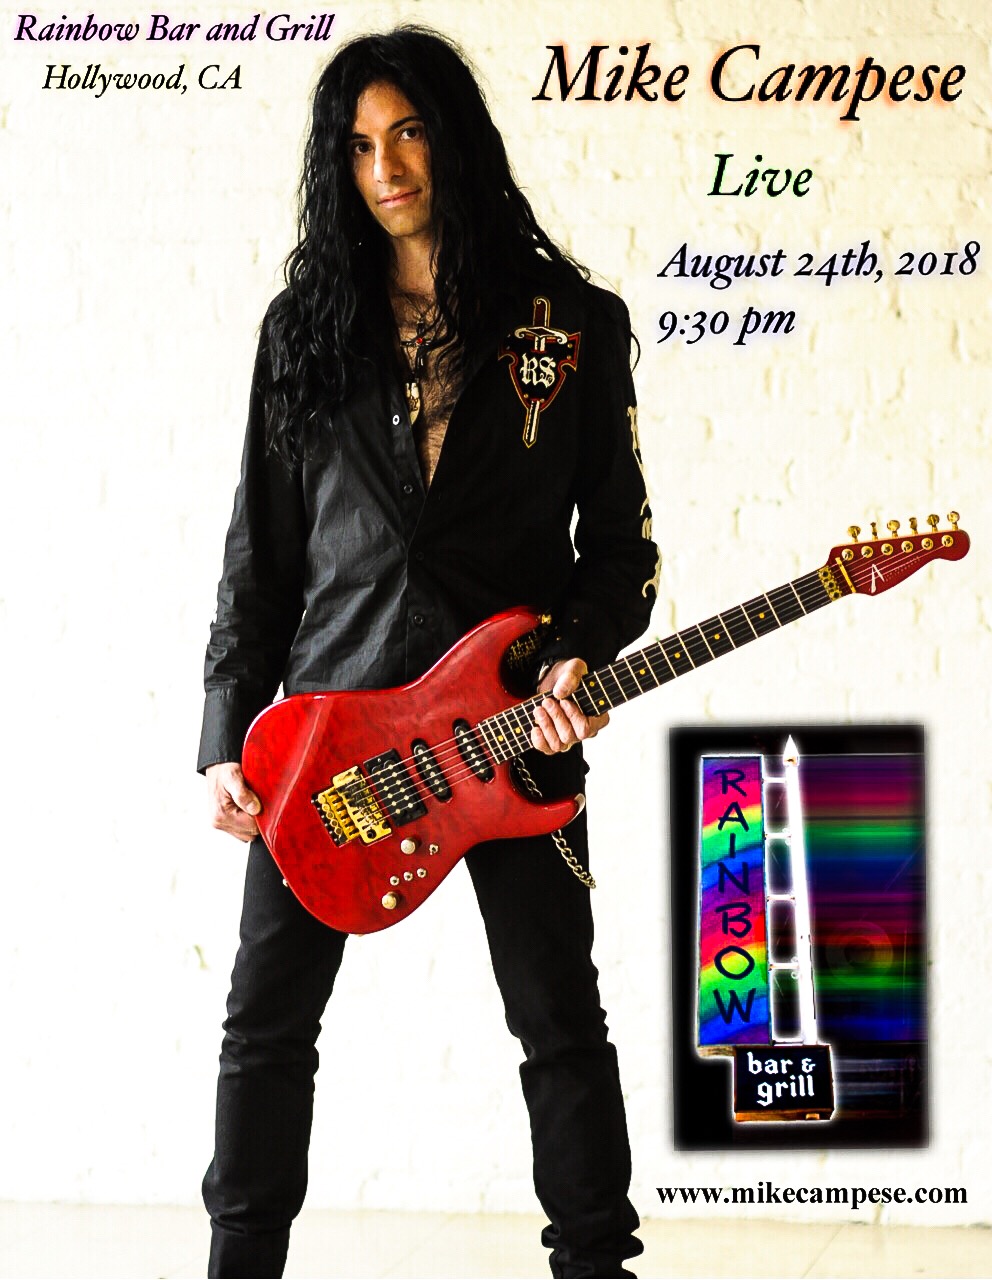 Mike Campese, Rainbow Bar and Grill Hollywood, CA.